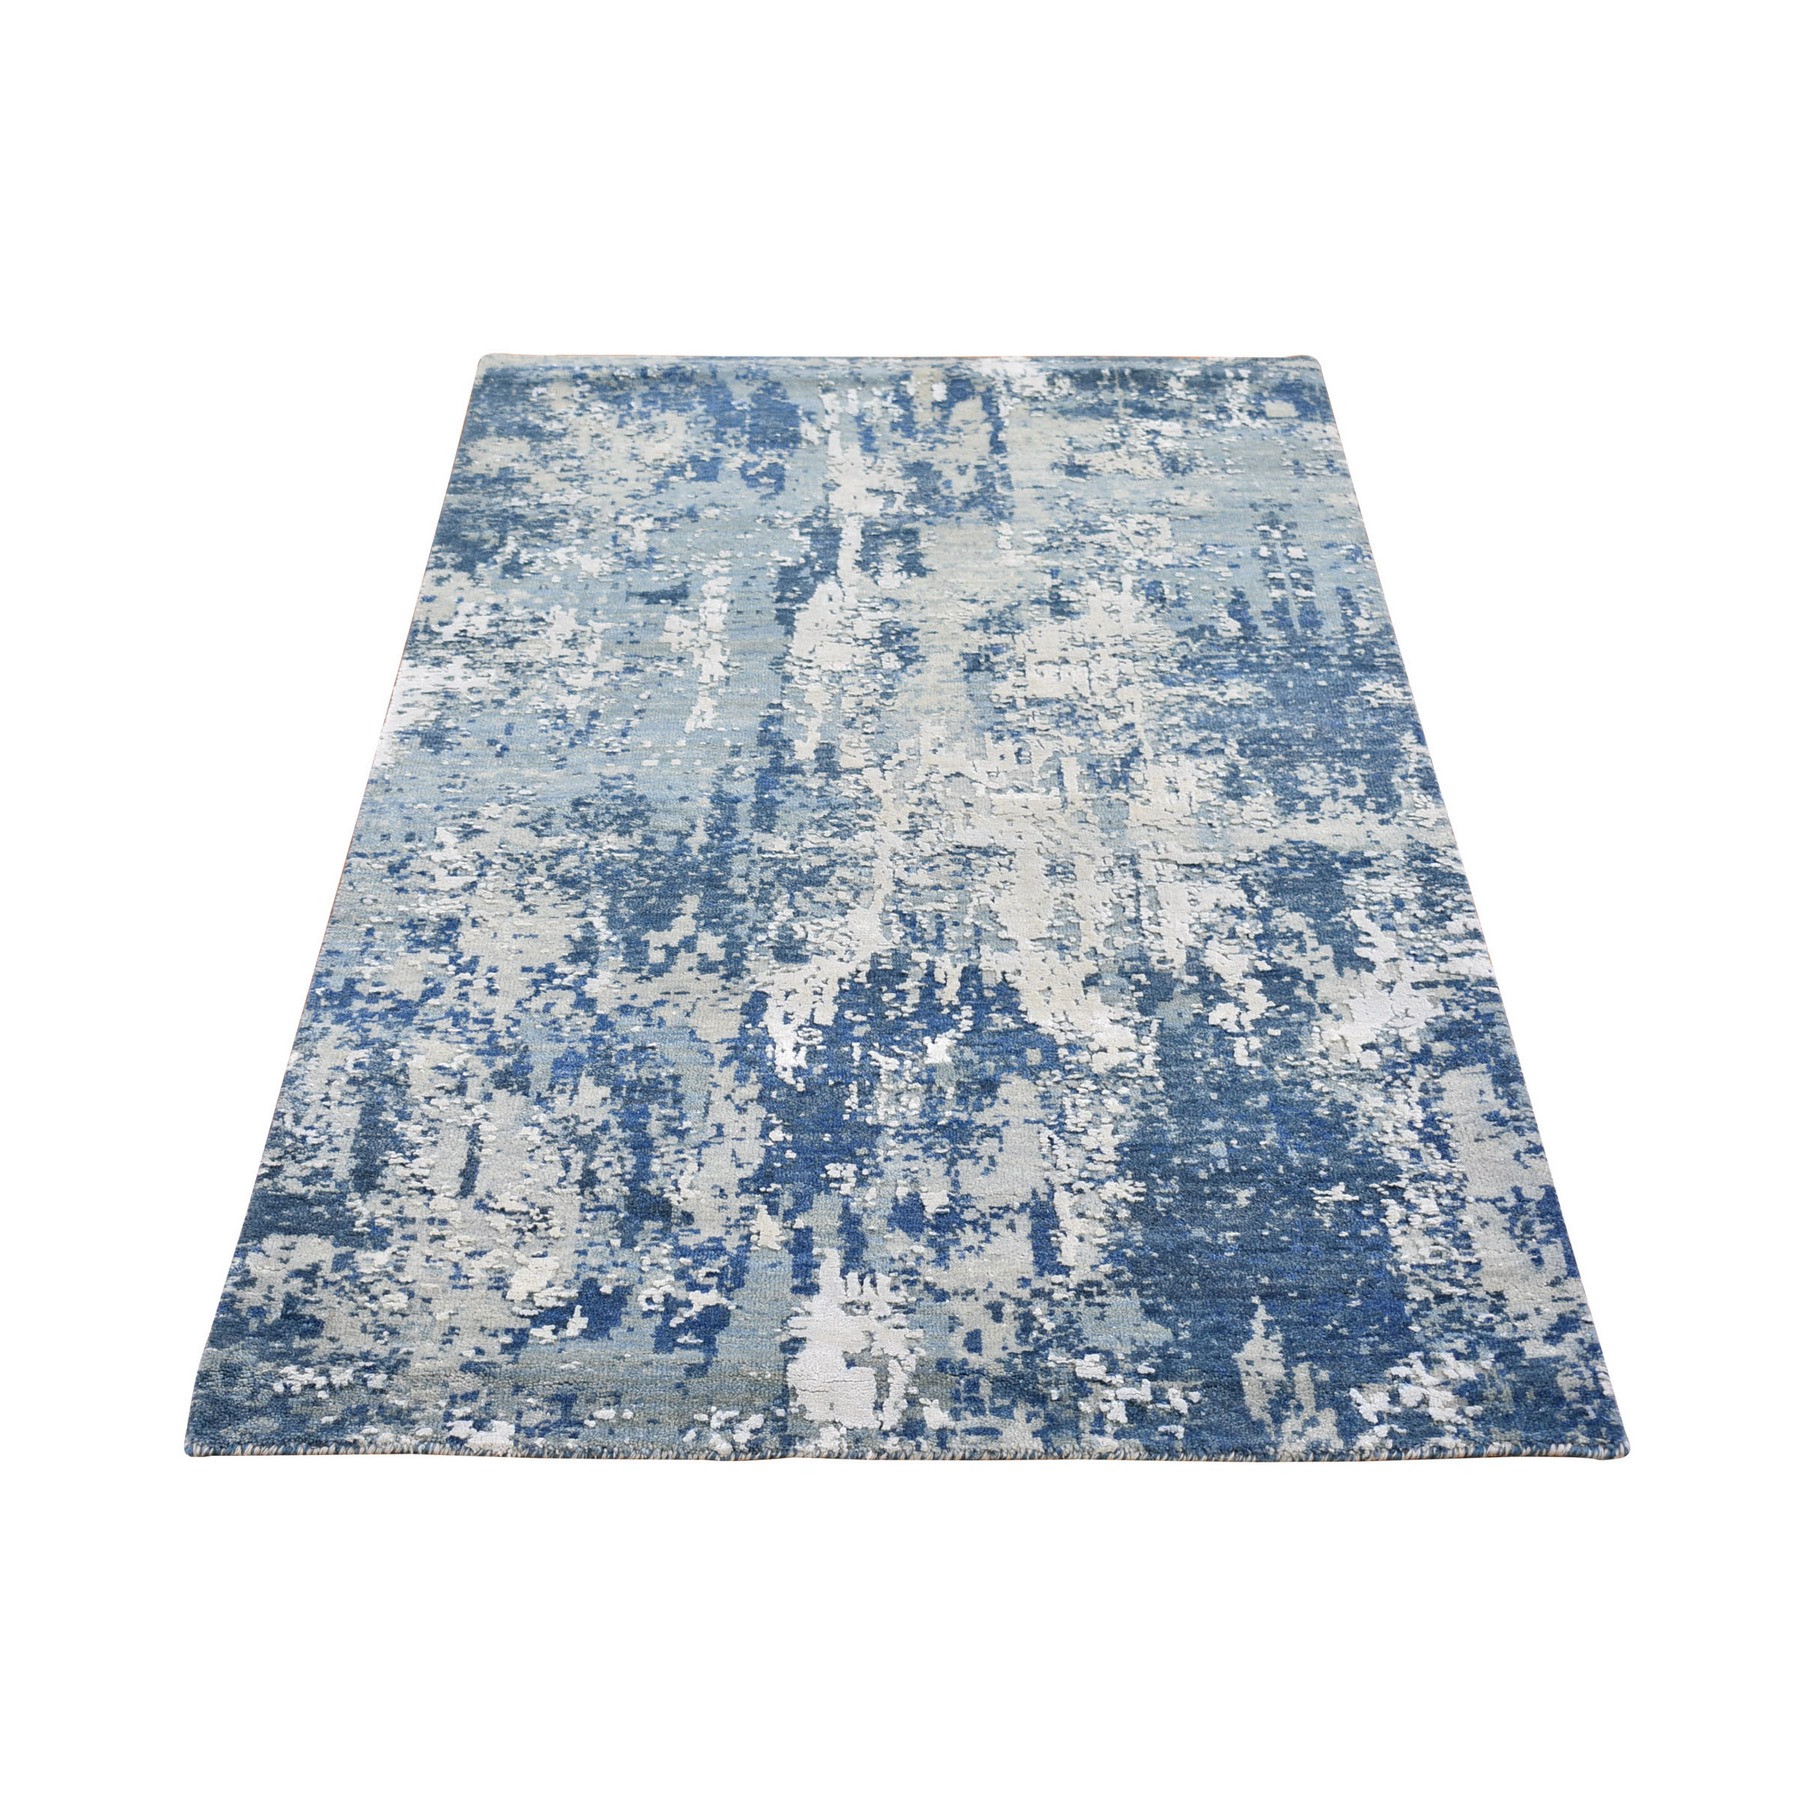 Mid Century Modern Collection Hand Knotted Blue Rug No: 1133526